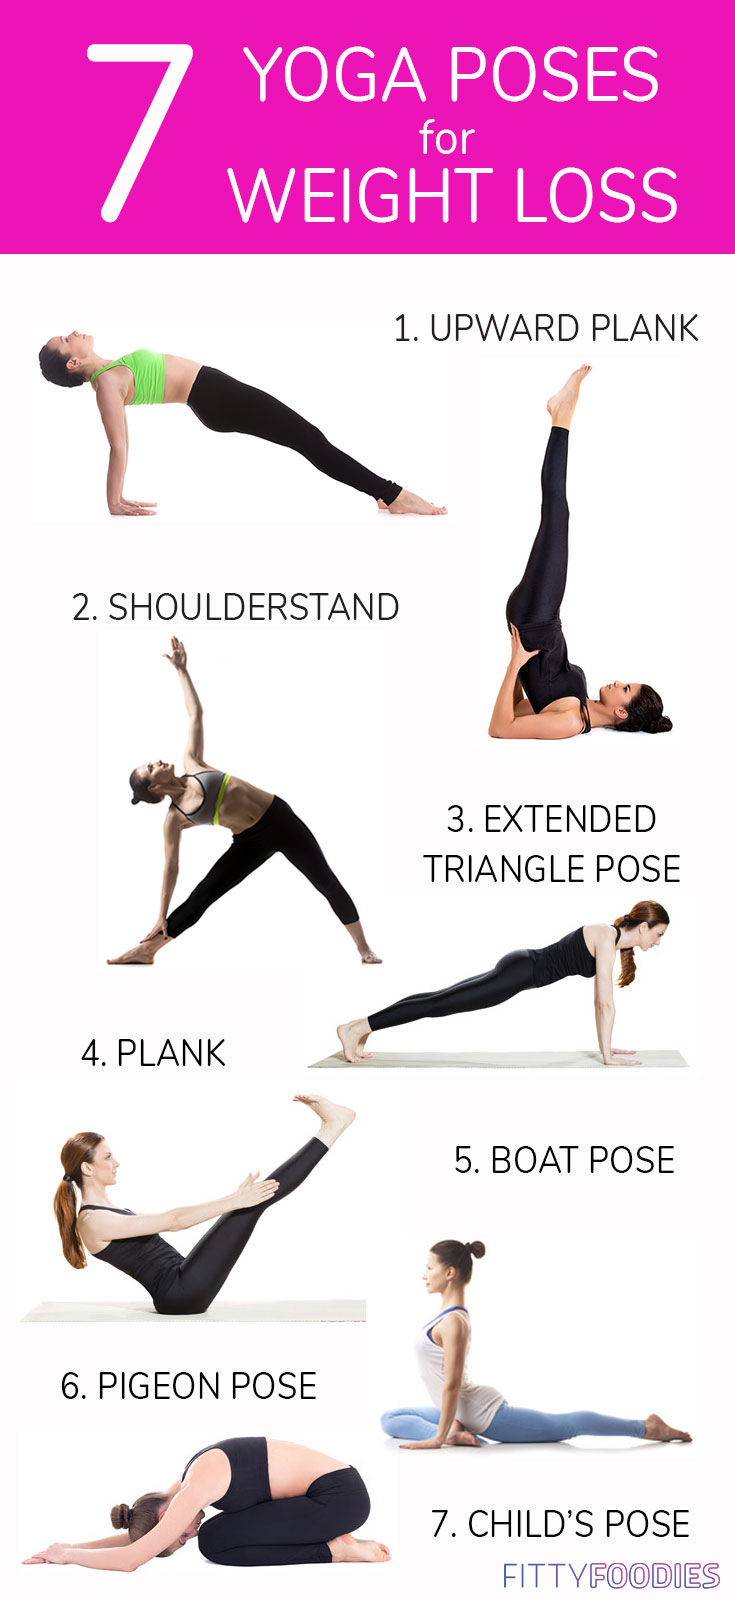 7 Yoga Poses For Weight Loss FatBurning Workout FittyFoodies